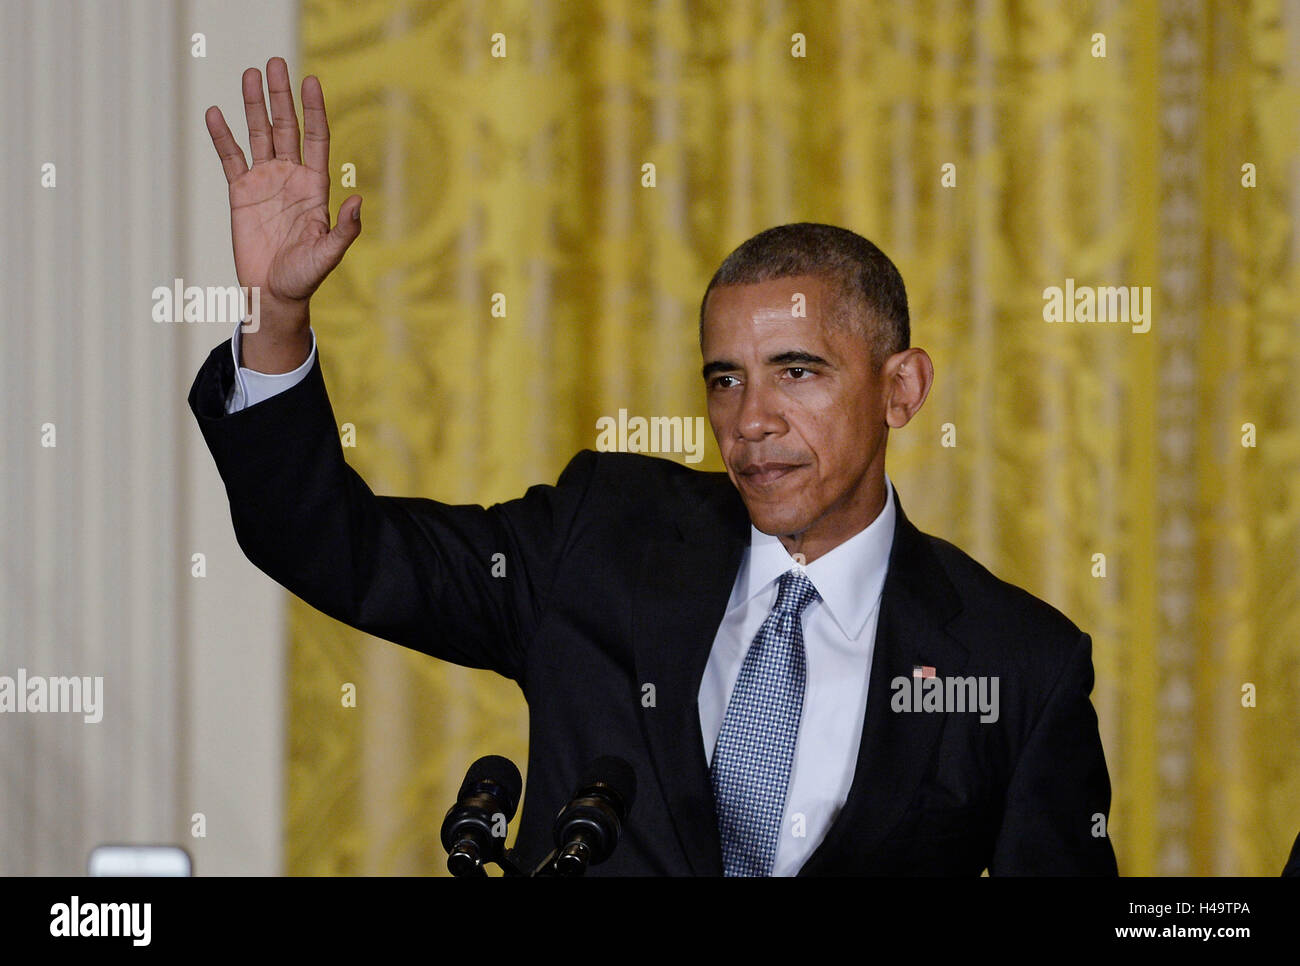 United States President Barack Obama waves after speaking at a reception for Hispanic Heritage Month in the East Room of the White House on October 12, 2016 in Washington, DC. Credit: Olivier Douliery/Pool via CNP /MediaPunch Stock Photo